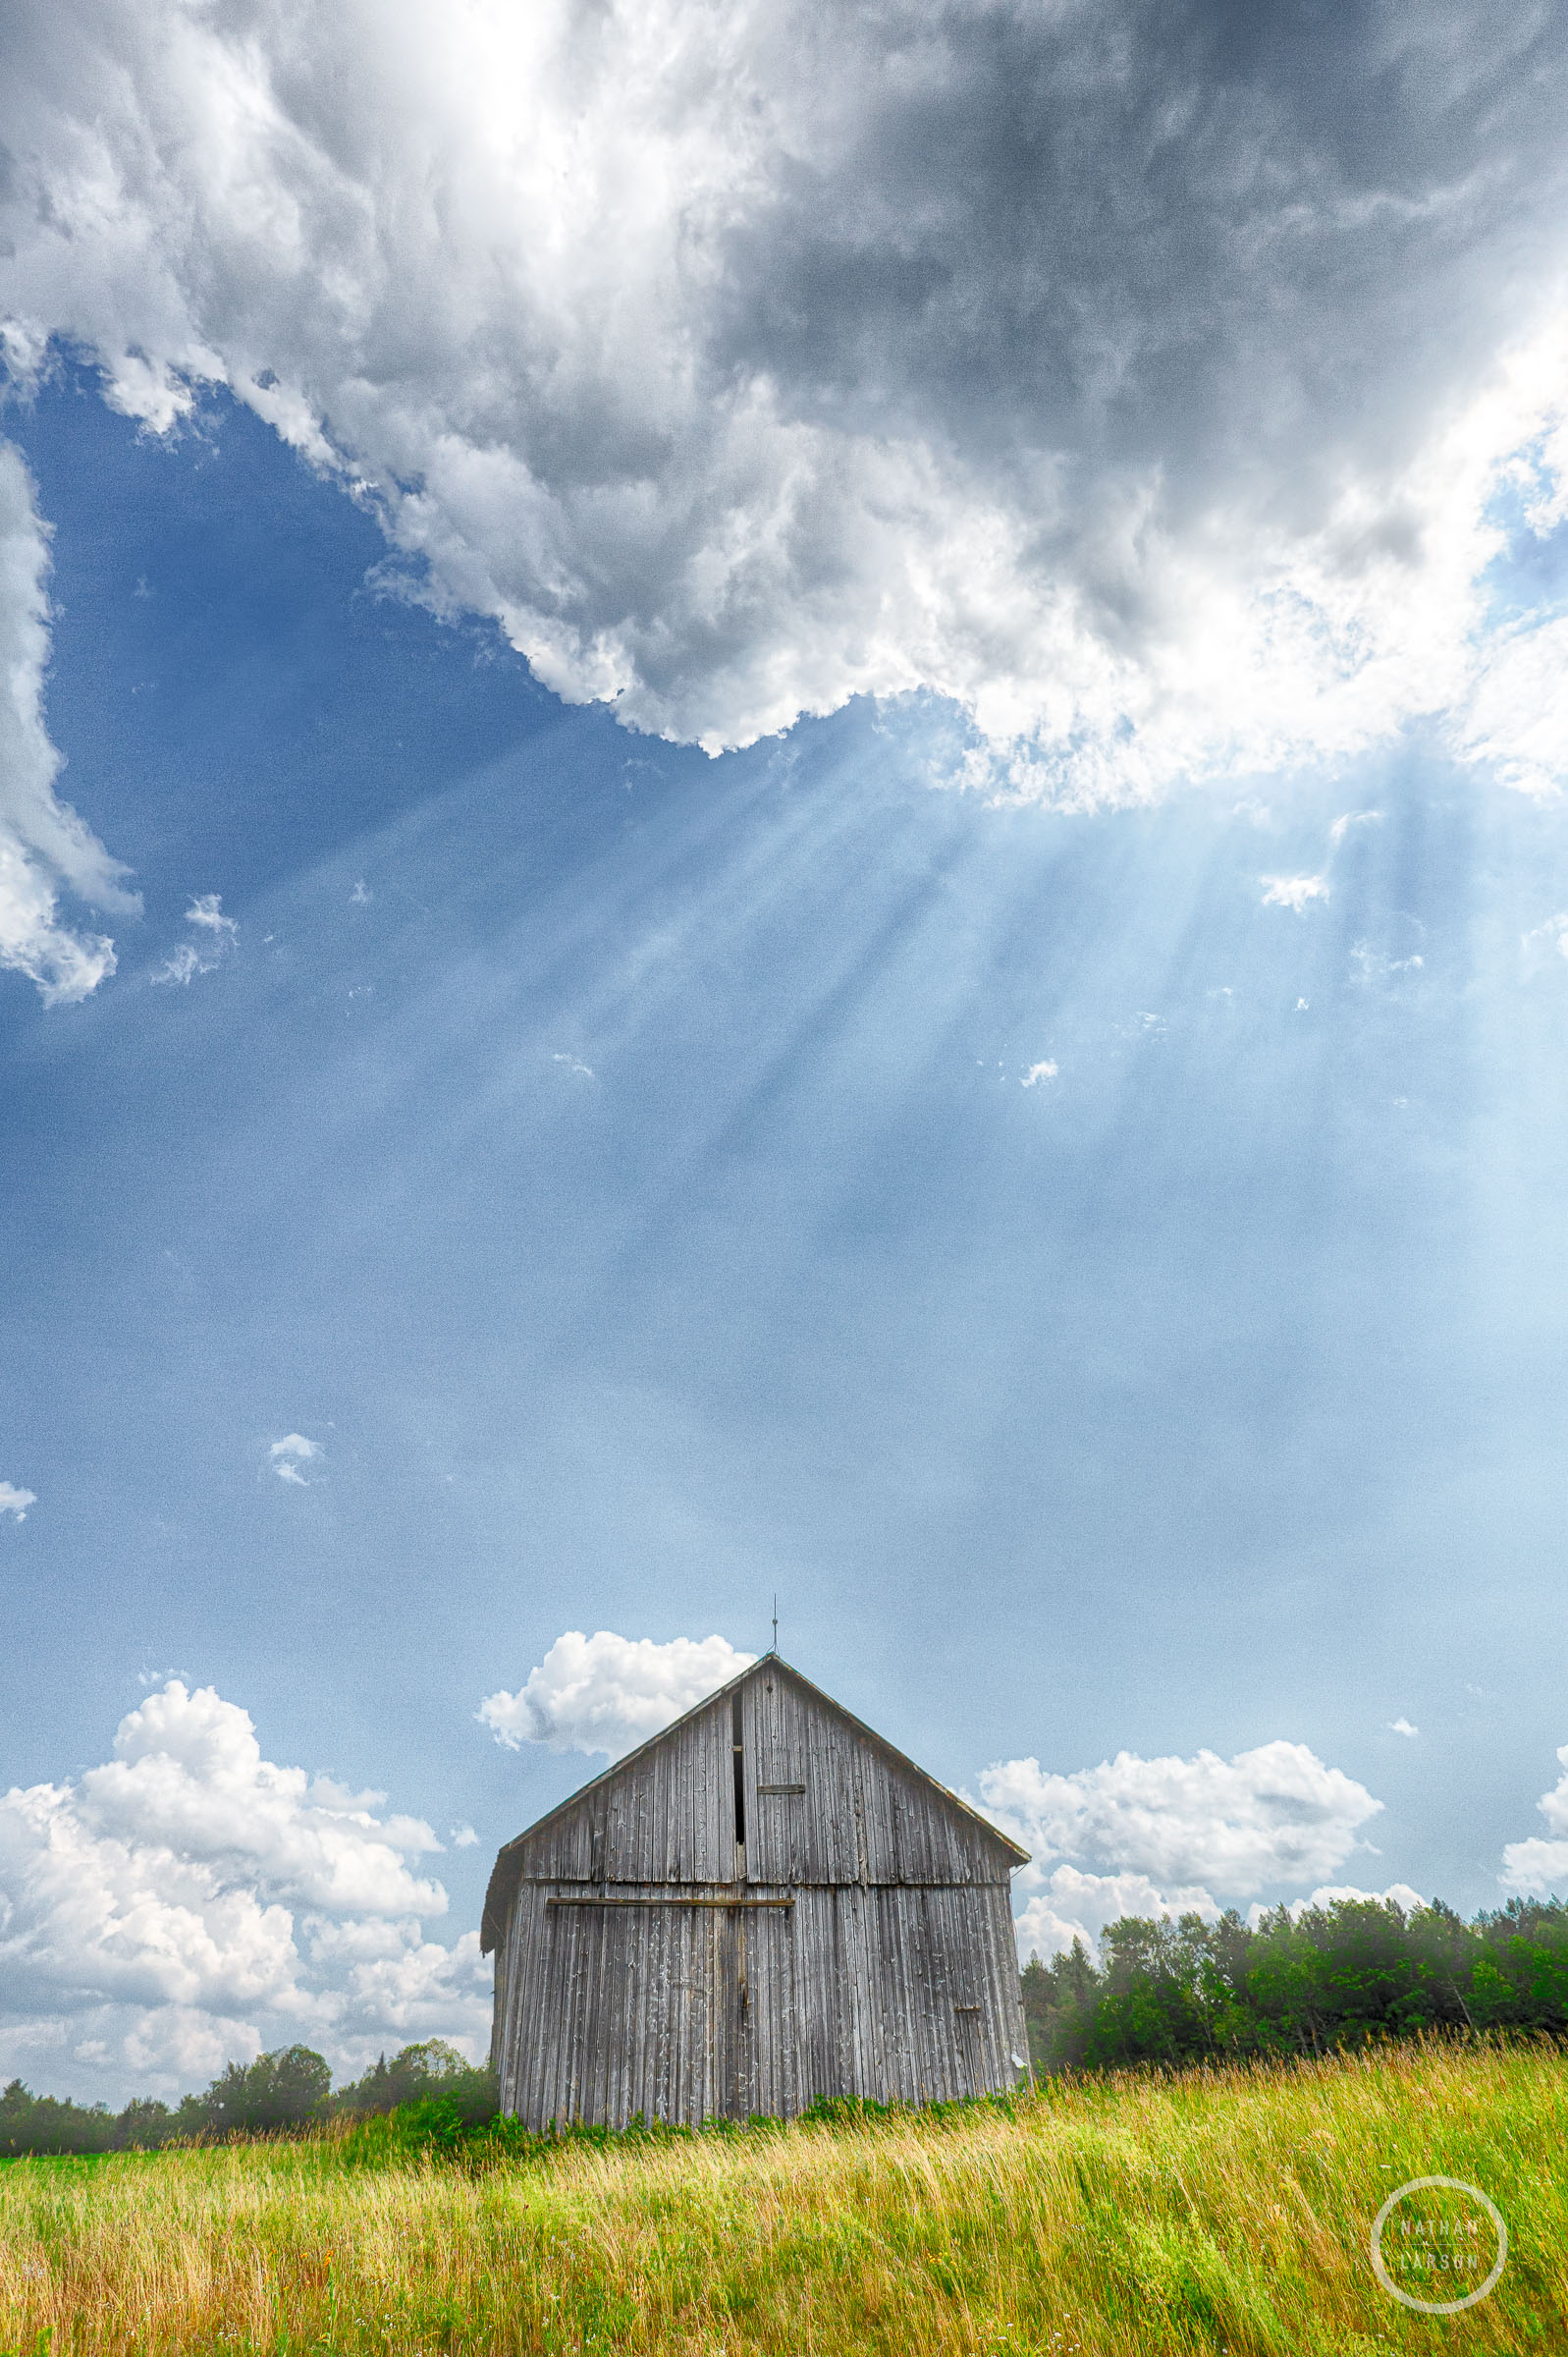 Another day and another amazing view of one of my favorite barns before a summer storm.